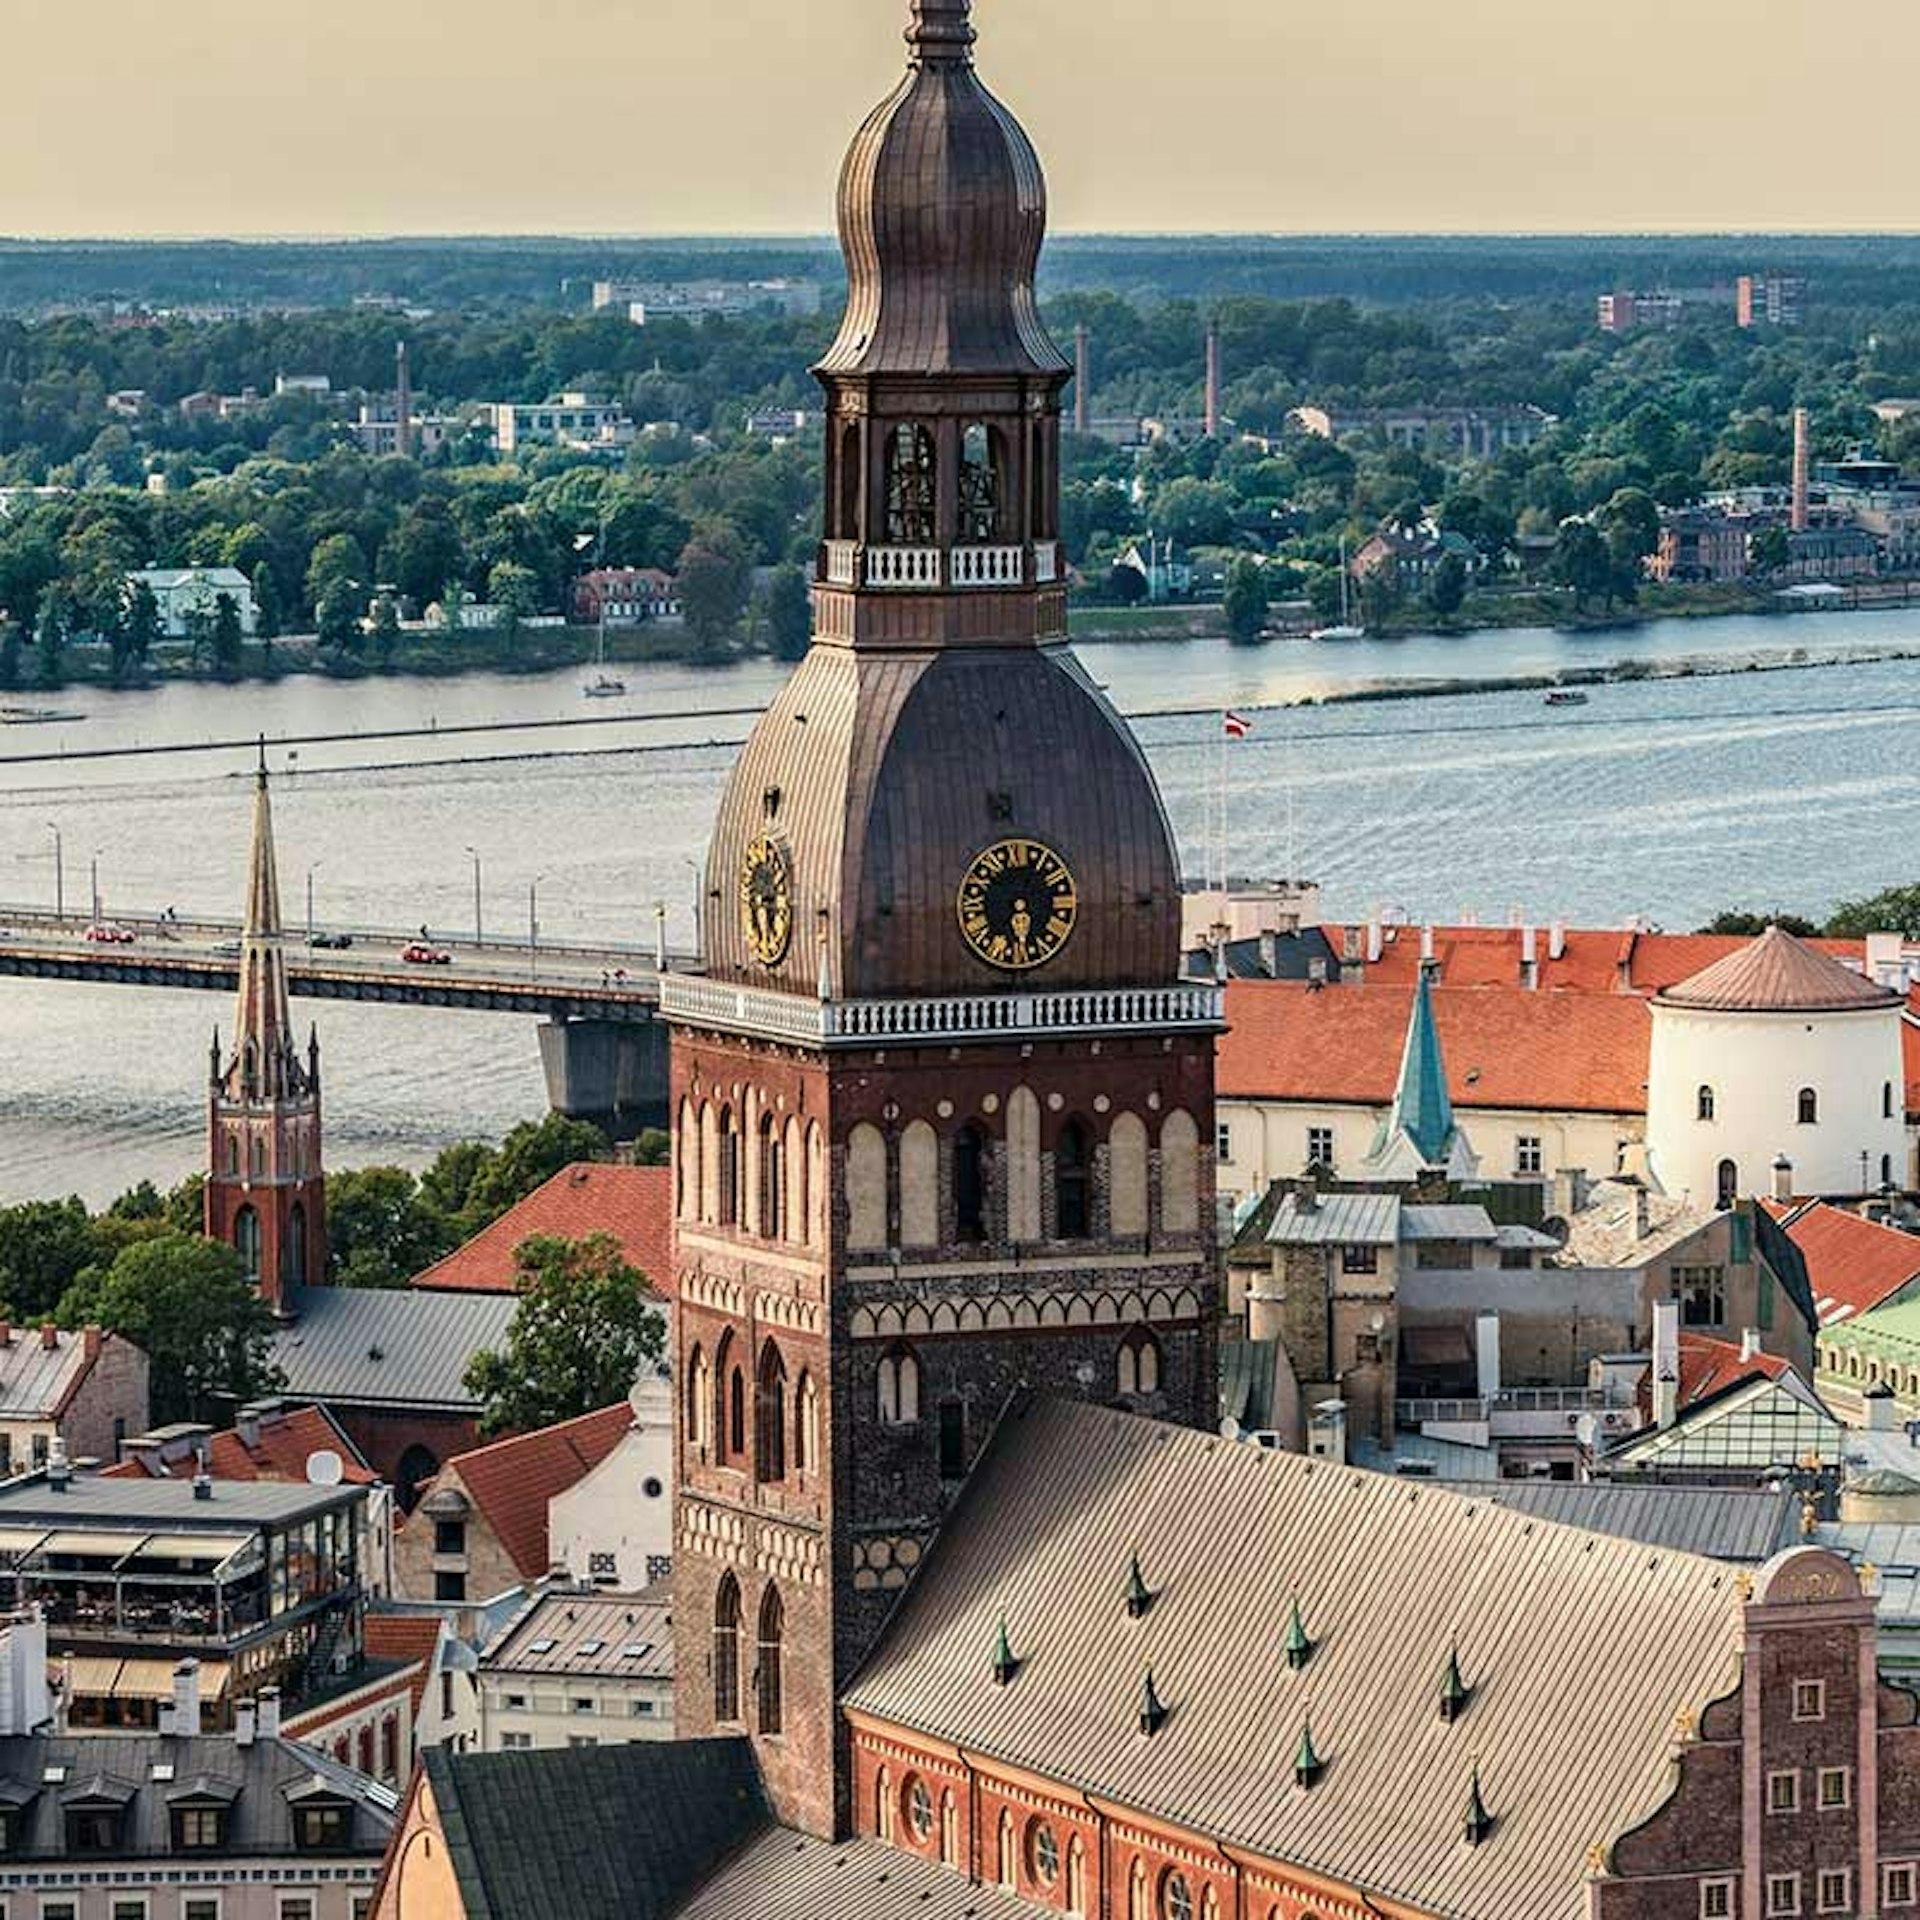 Get the latest news and updates on e-invoicing, e-ordering, e-archiving and indirect tax regulatory requirements for Latvia.